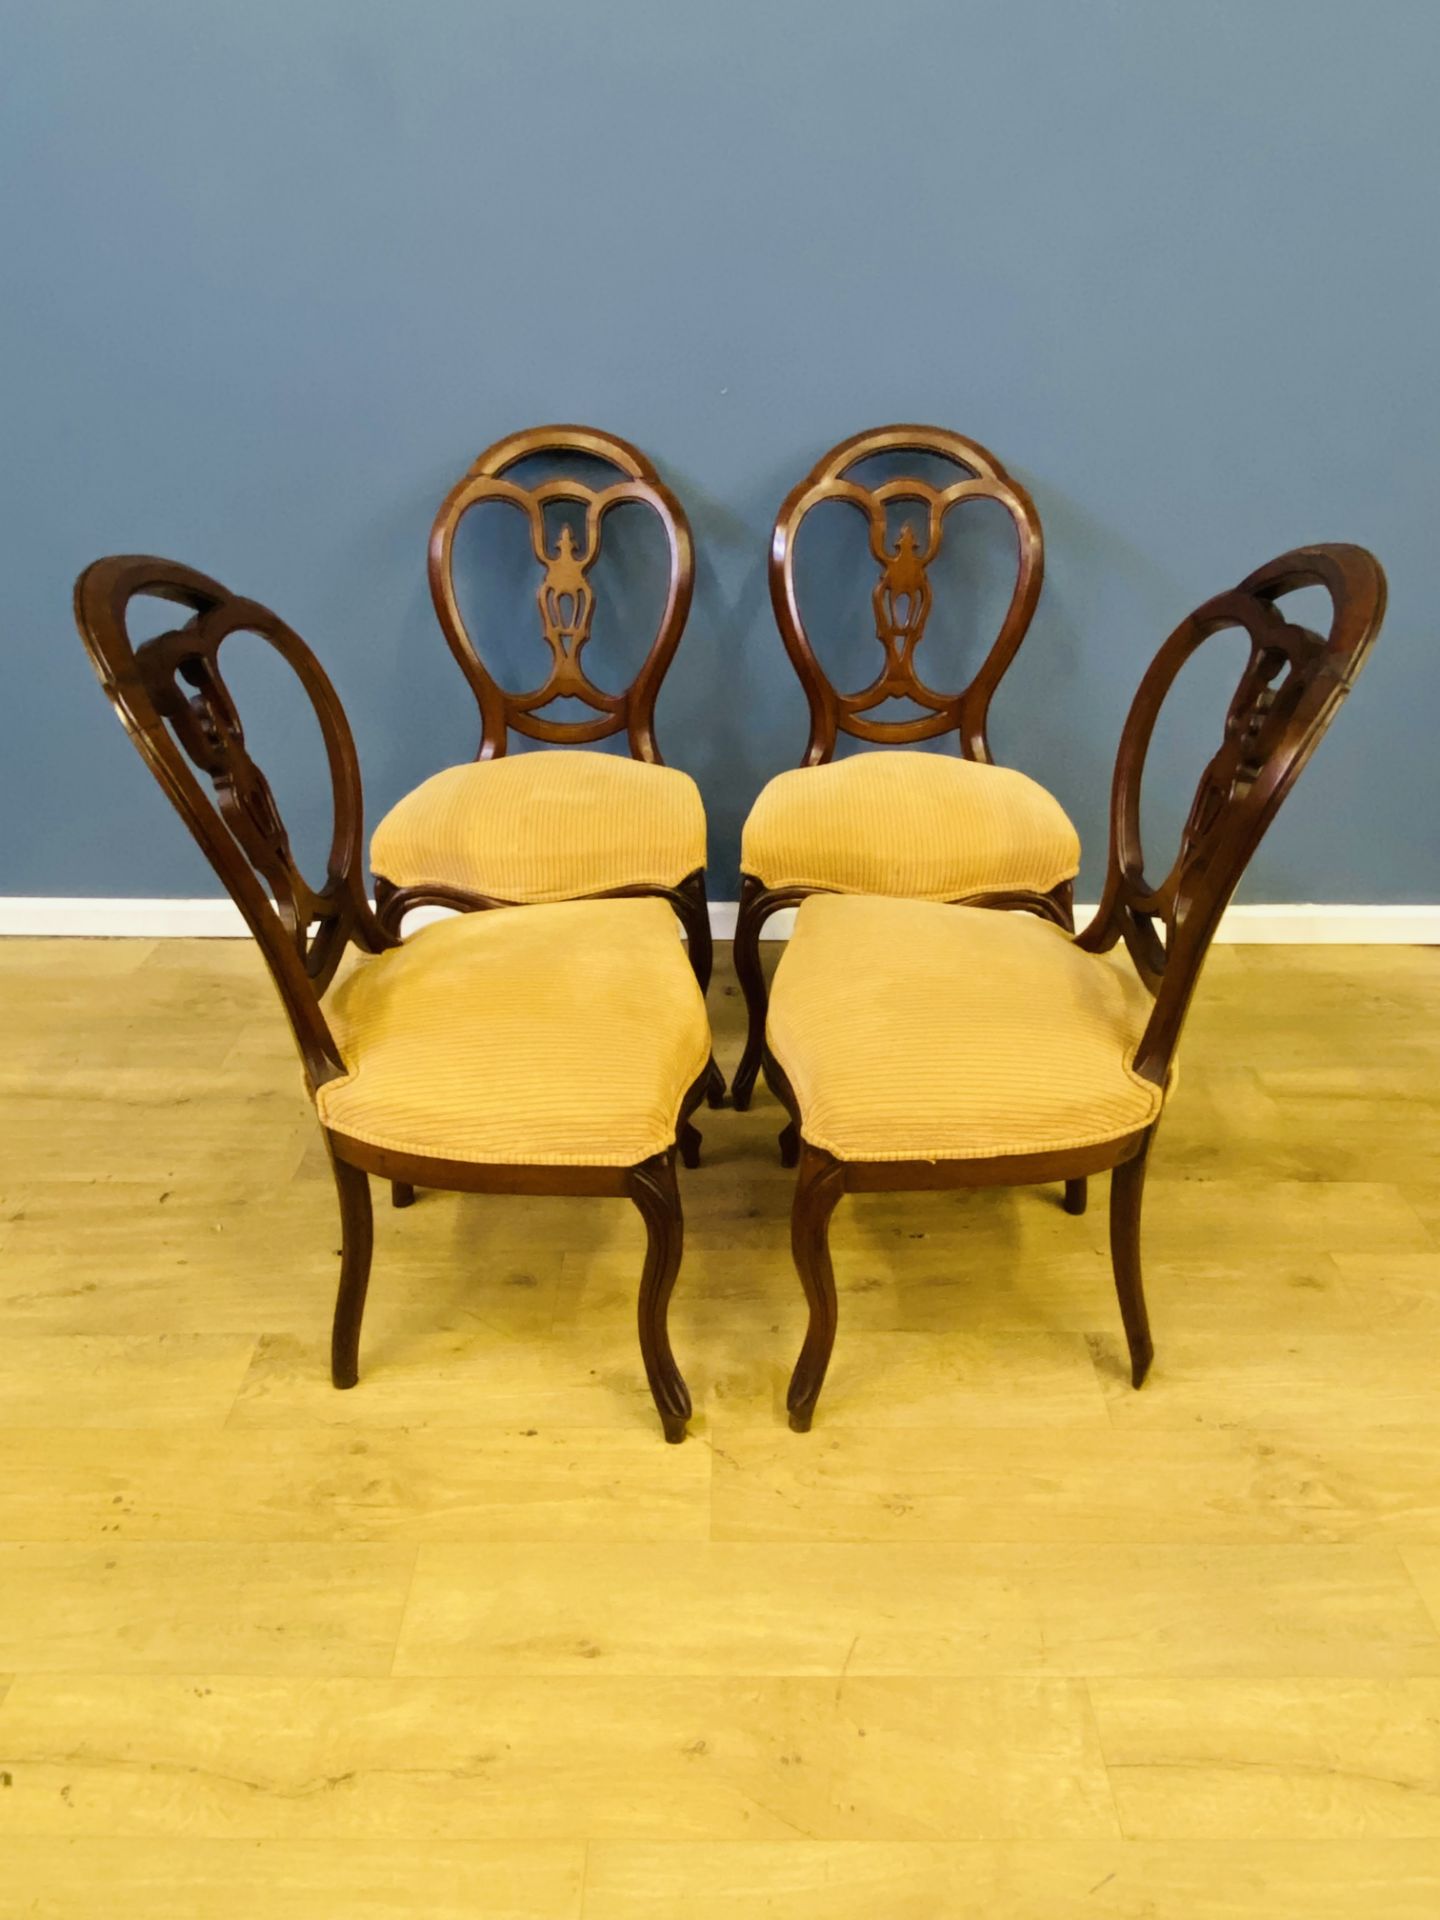 Four walnut balloon back chairs - Image 2 of 6